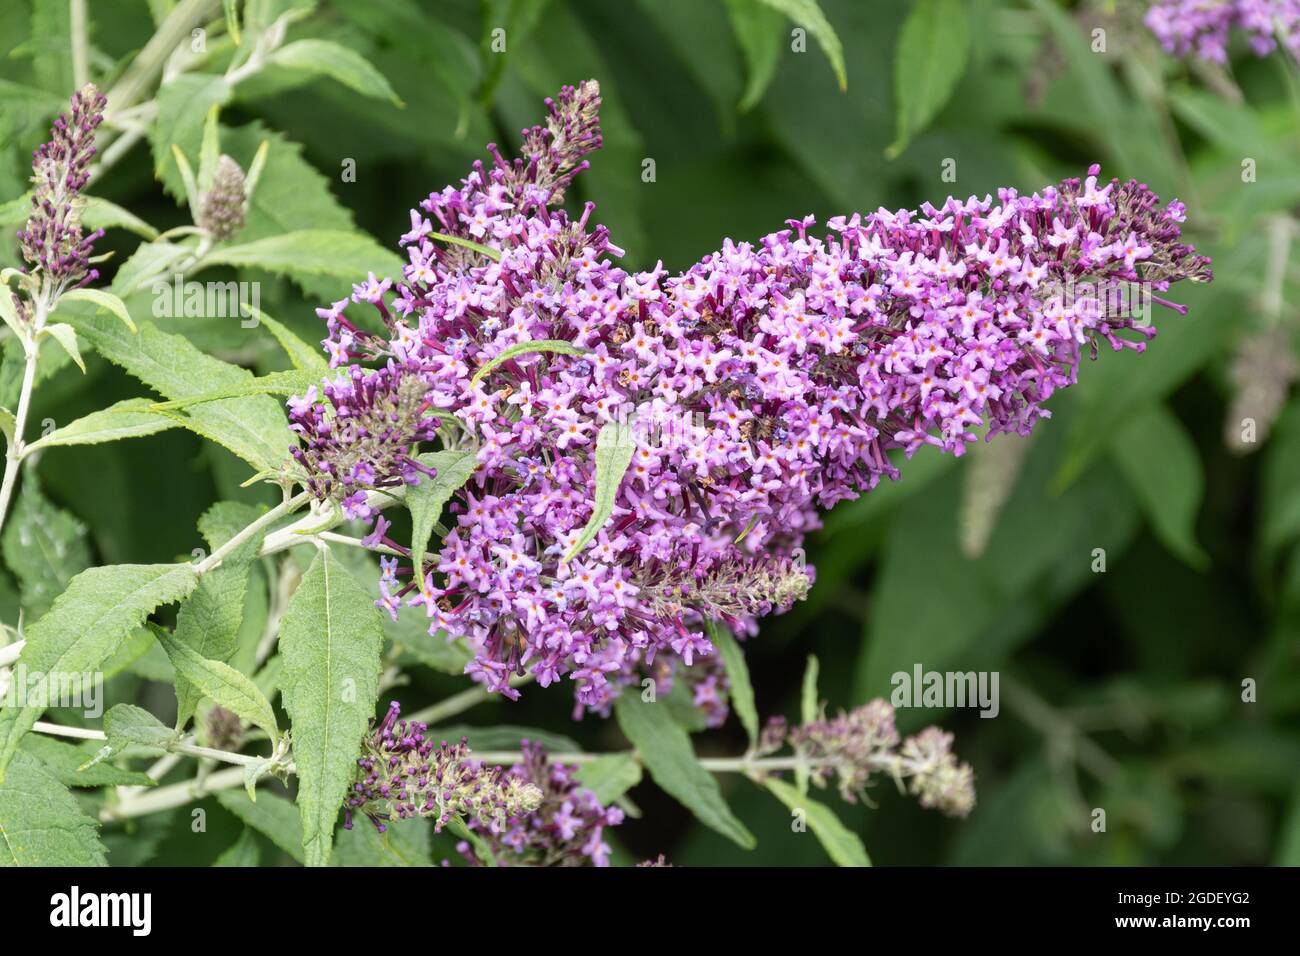 Buddleja 'Flutterby Pink' (buddleia variety), known as a butterfly bush, in flower during august or summer, UK Stock Photo